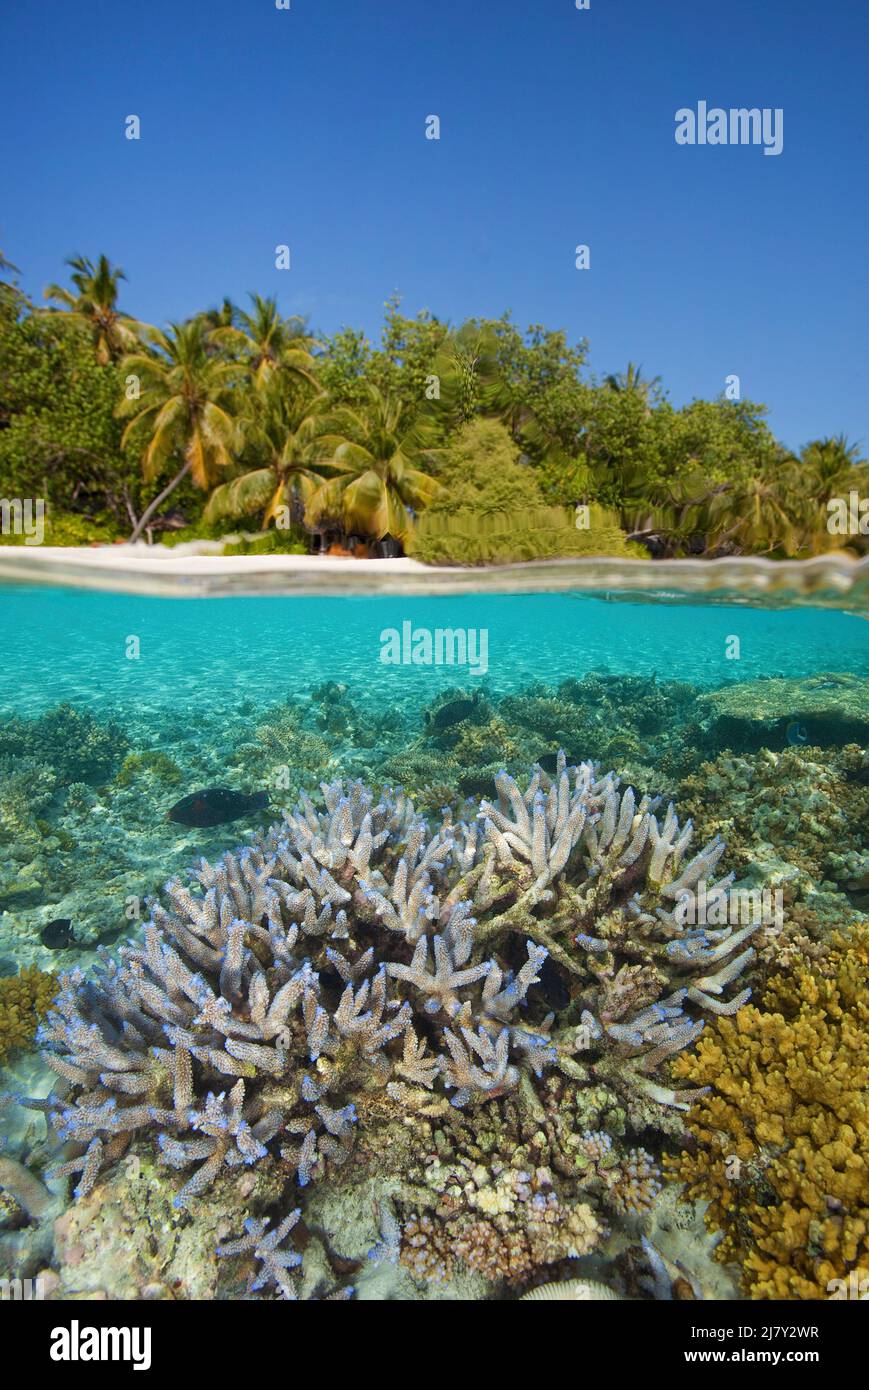 Split image, over under, coral reef in front of a maldivian island, Maldives, Indian ocean, Asia Stock Photo